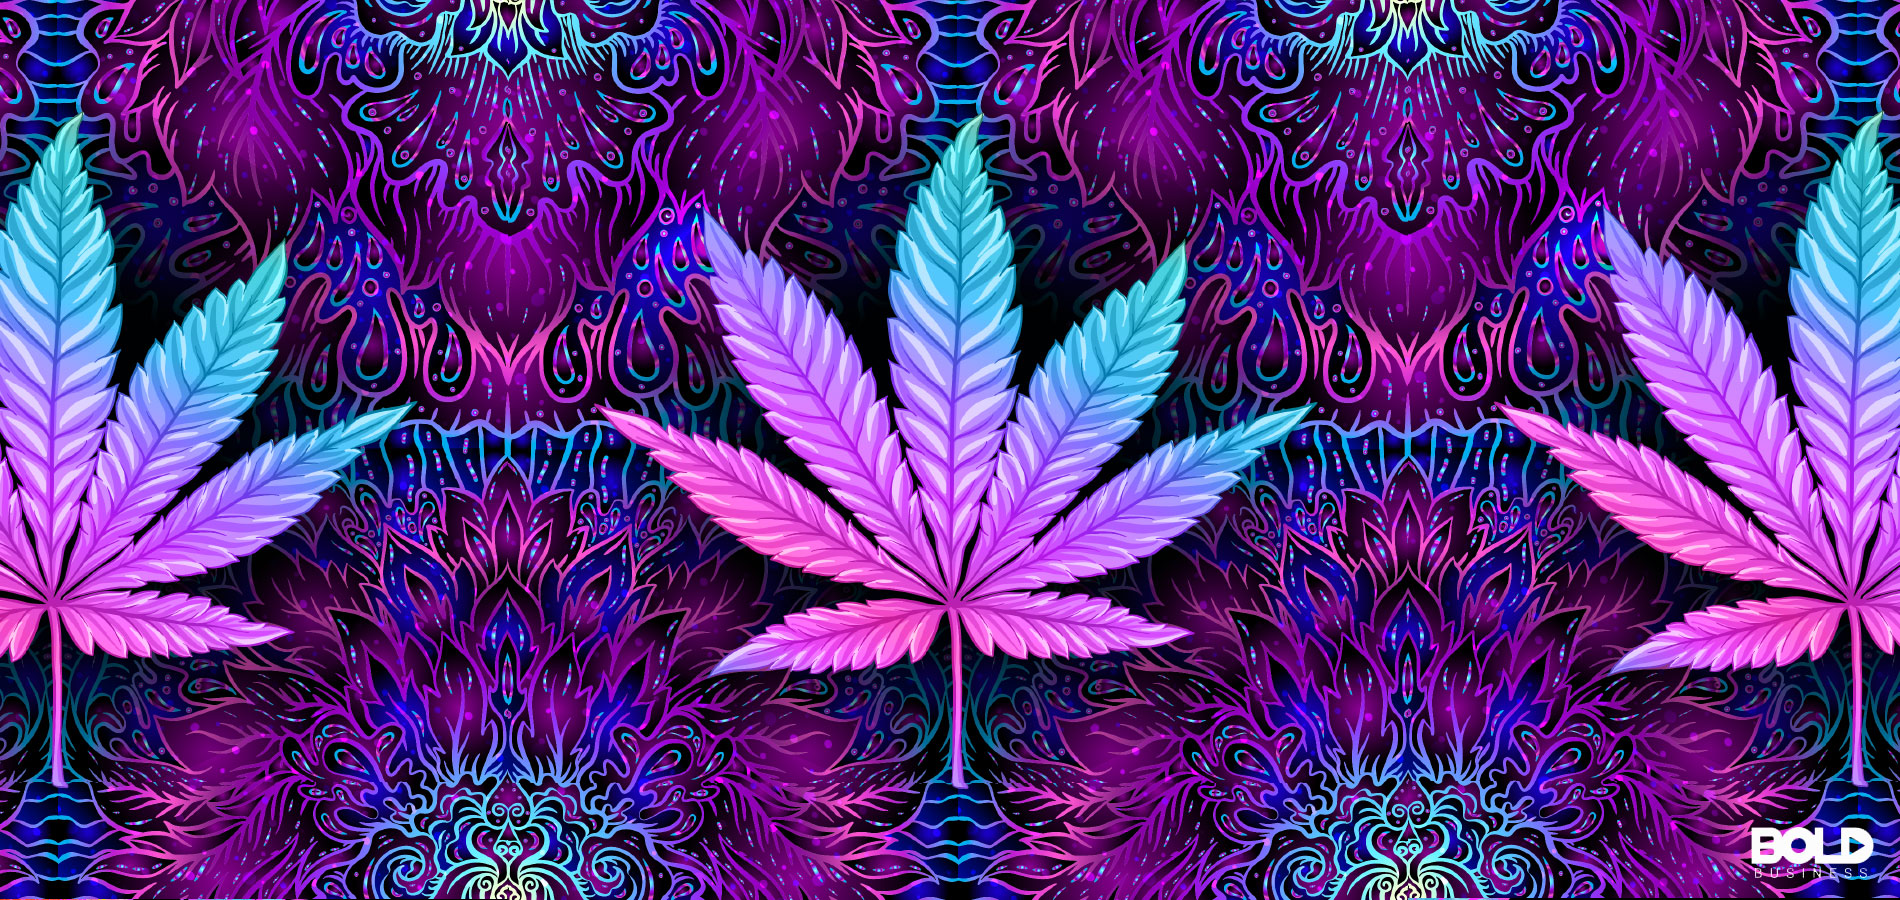 A psychedelic rendering of some marijuana leaves